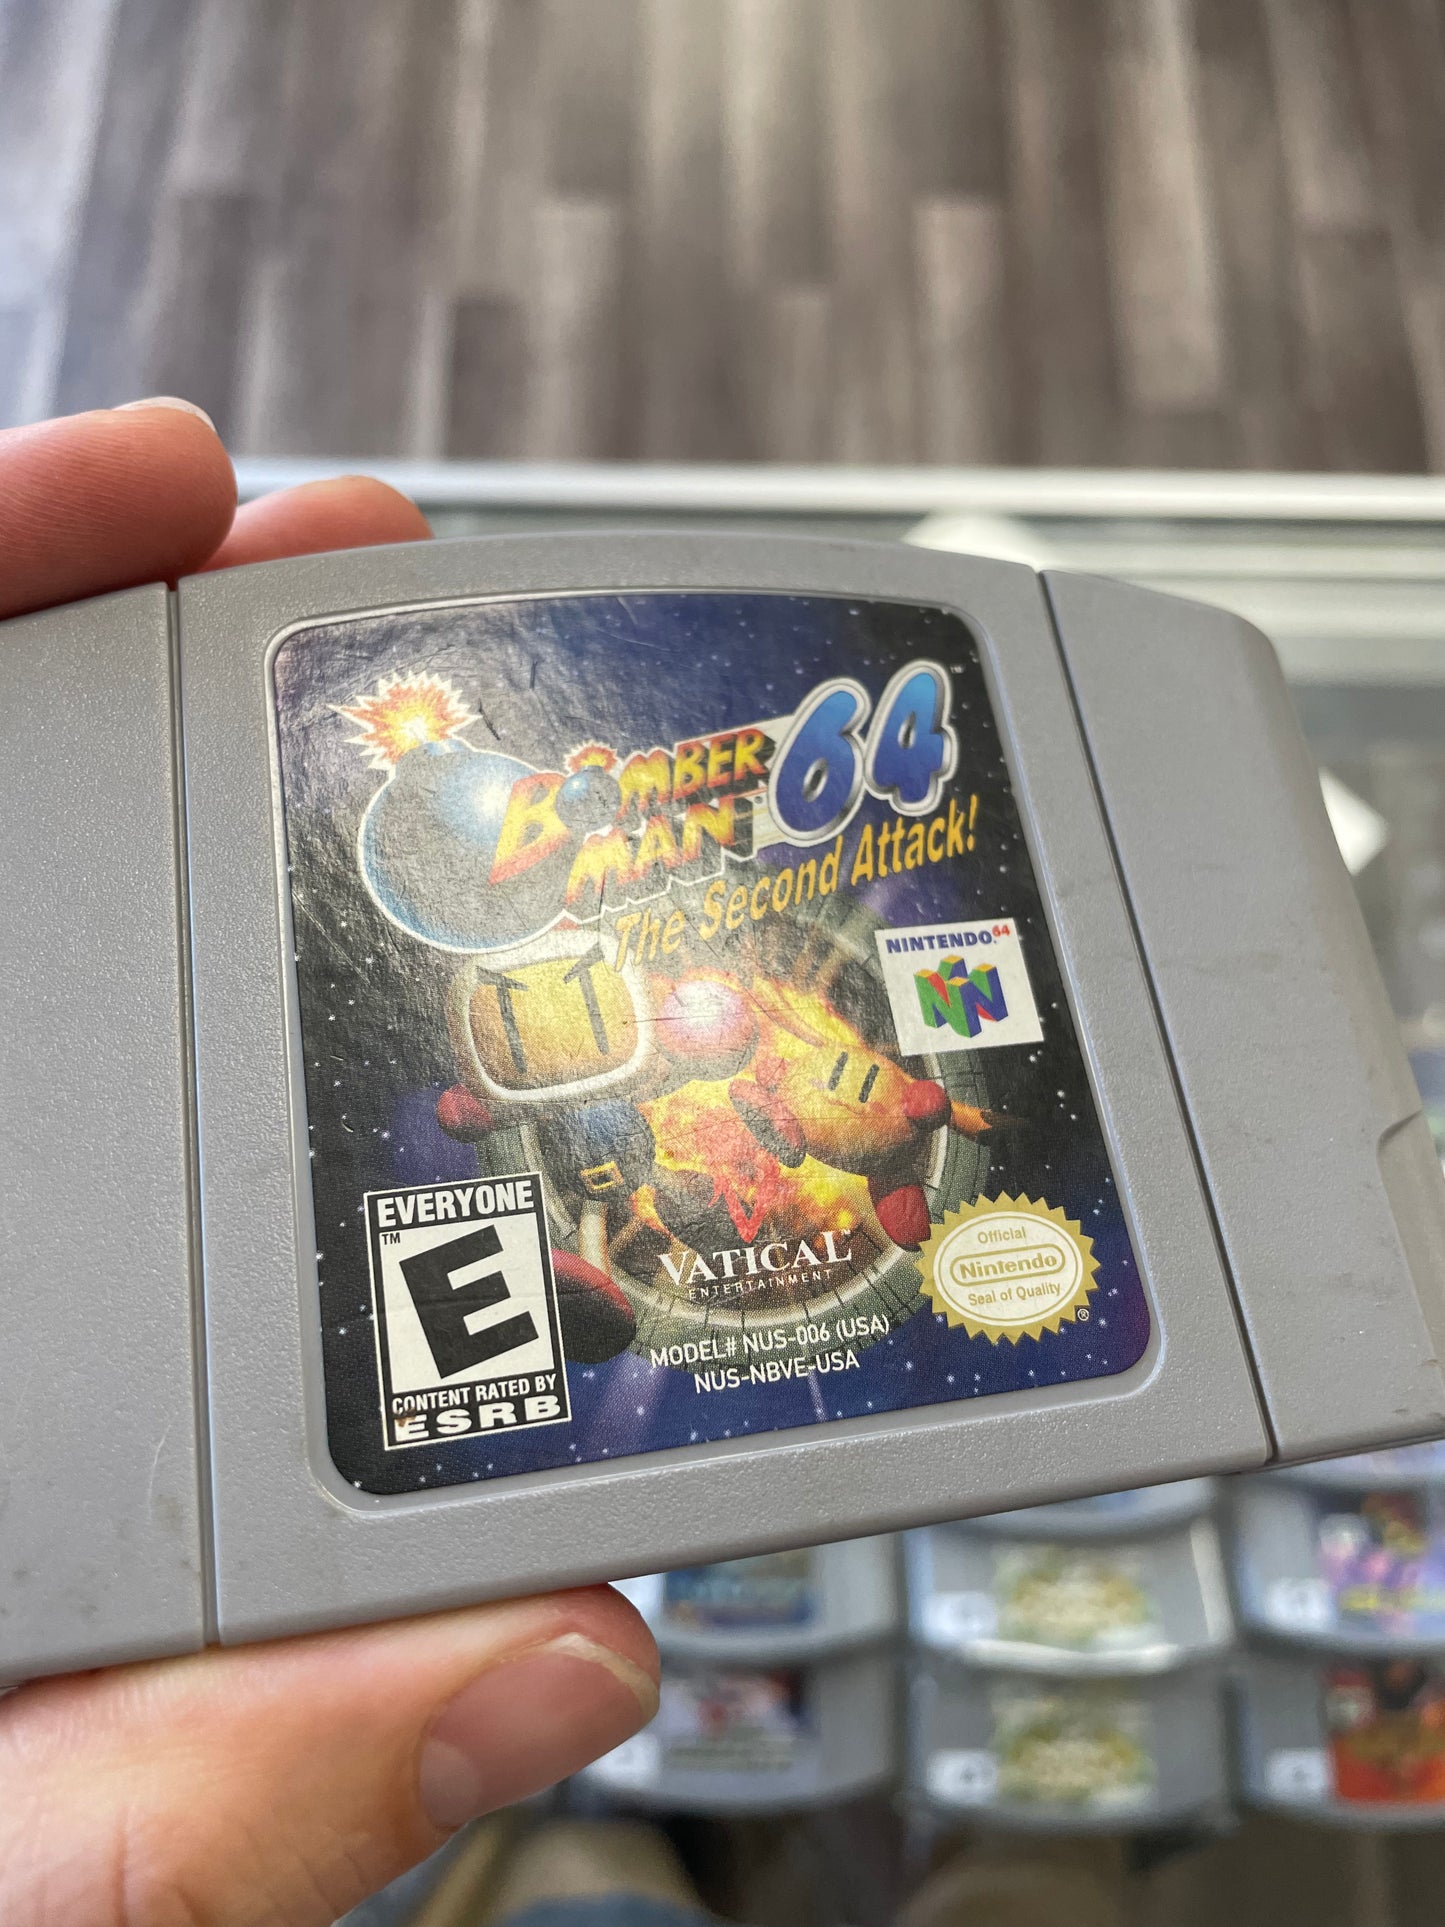 Bomberman 64 Second Attack for Nintendo 64 NICE LABEL